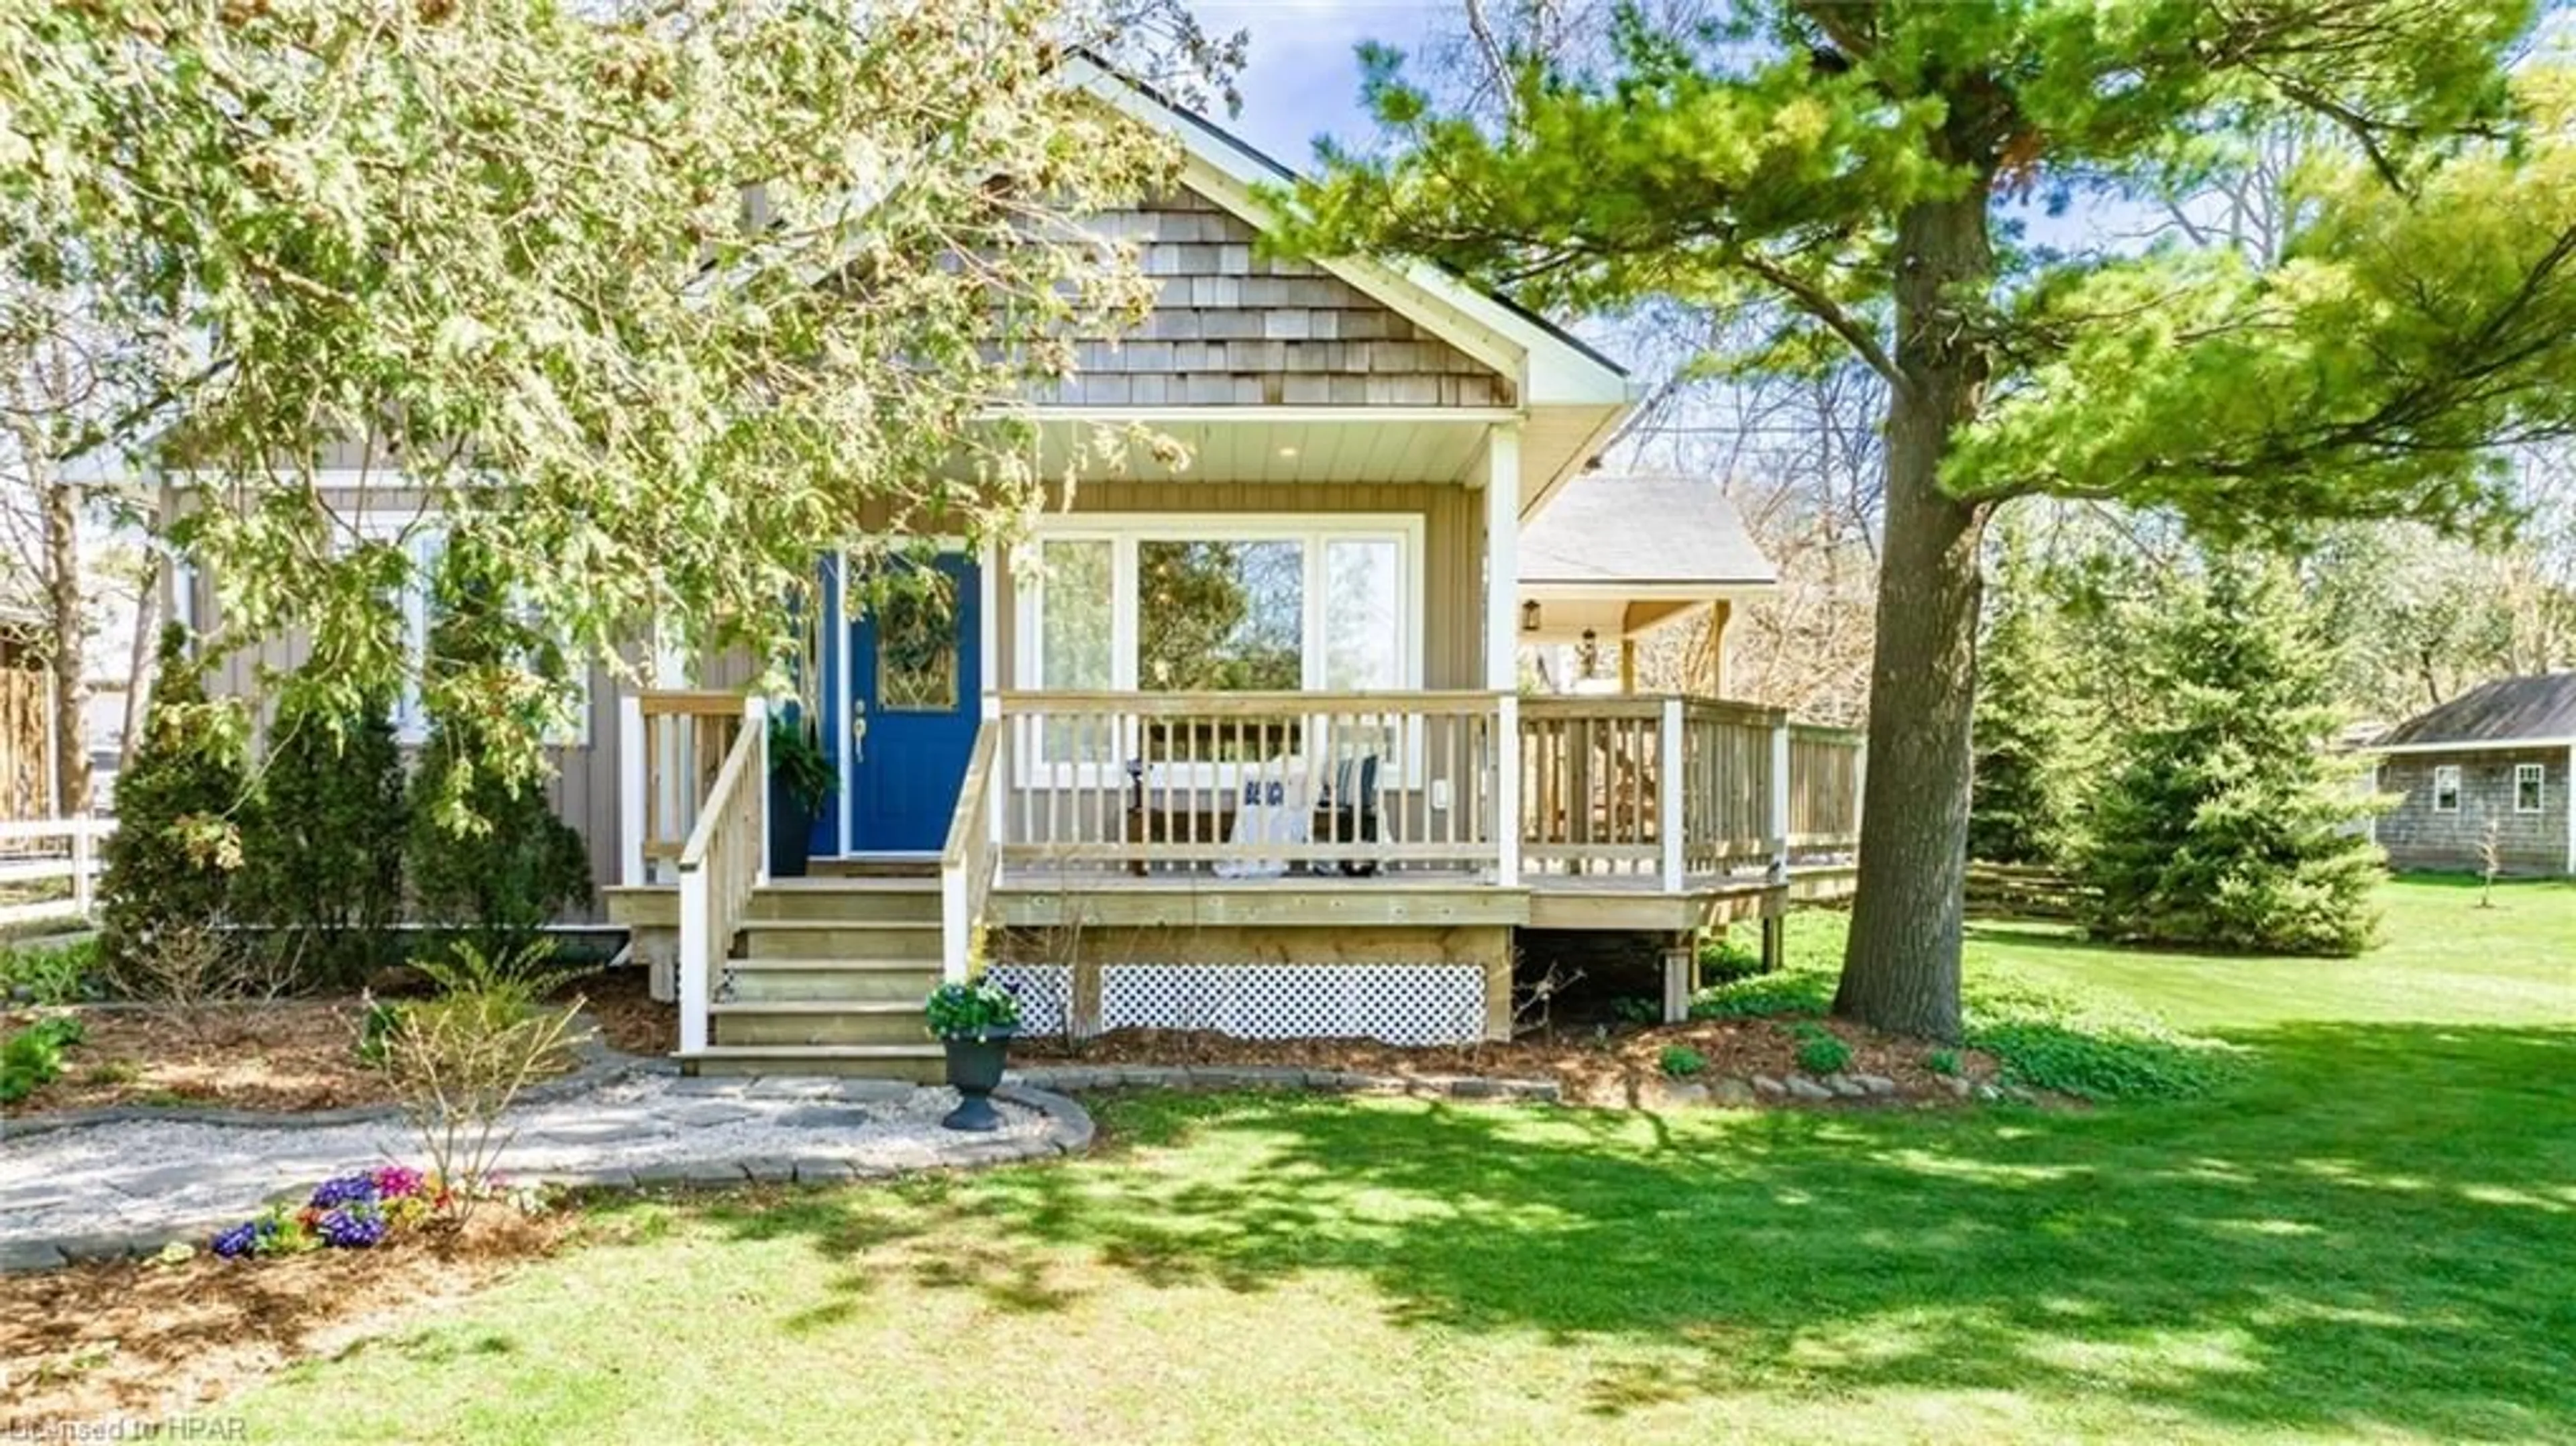 Cottage for 20 Charles Street, Bayfield Ontario N0M 1G0